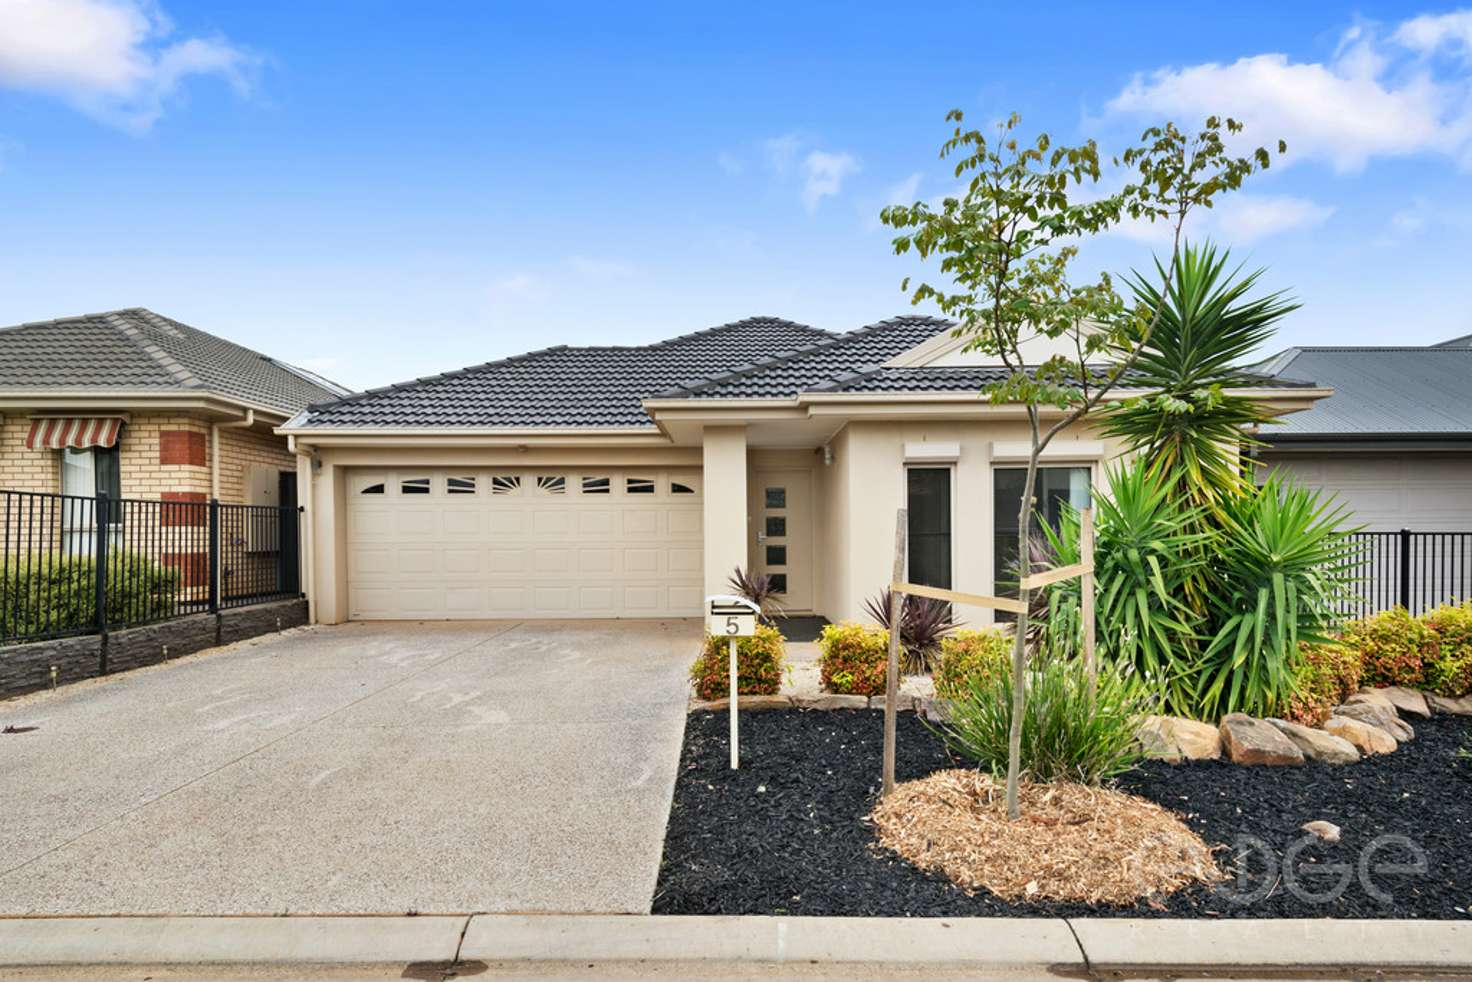 Main view of Homely house listing, 5 Margaret Street, Blakeview SA 5114